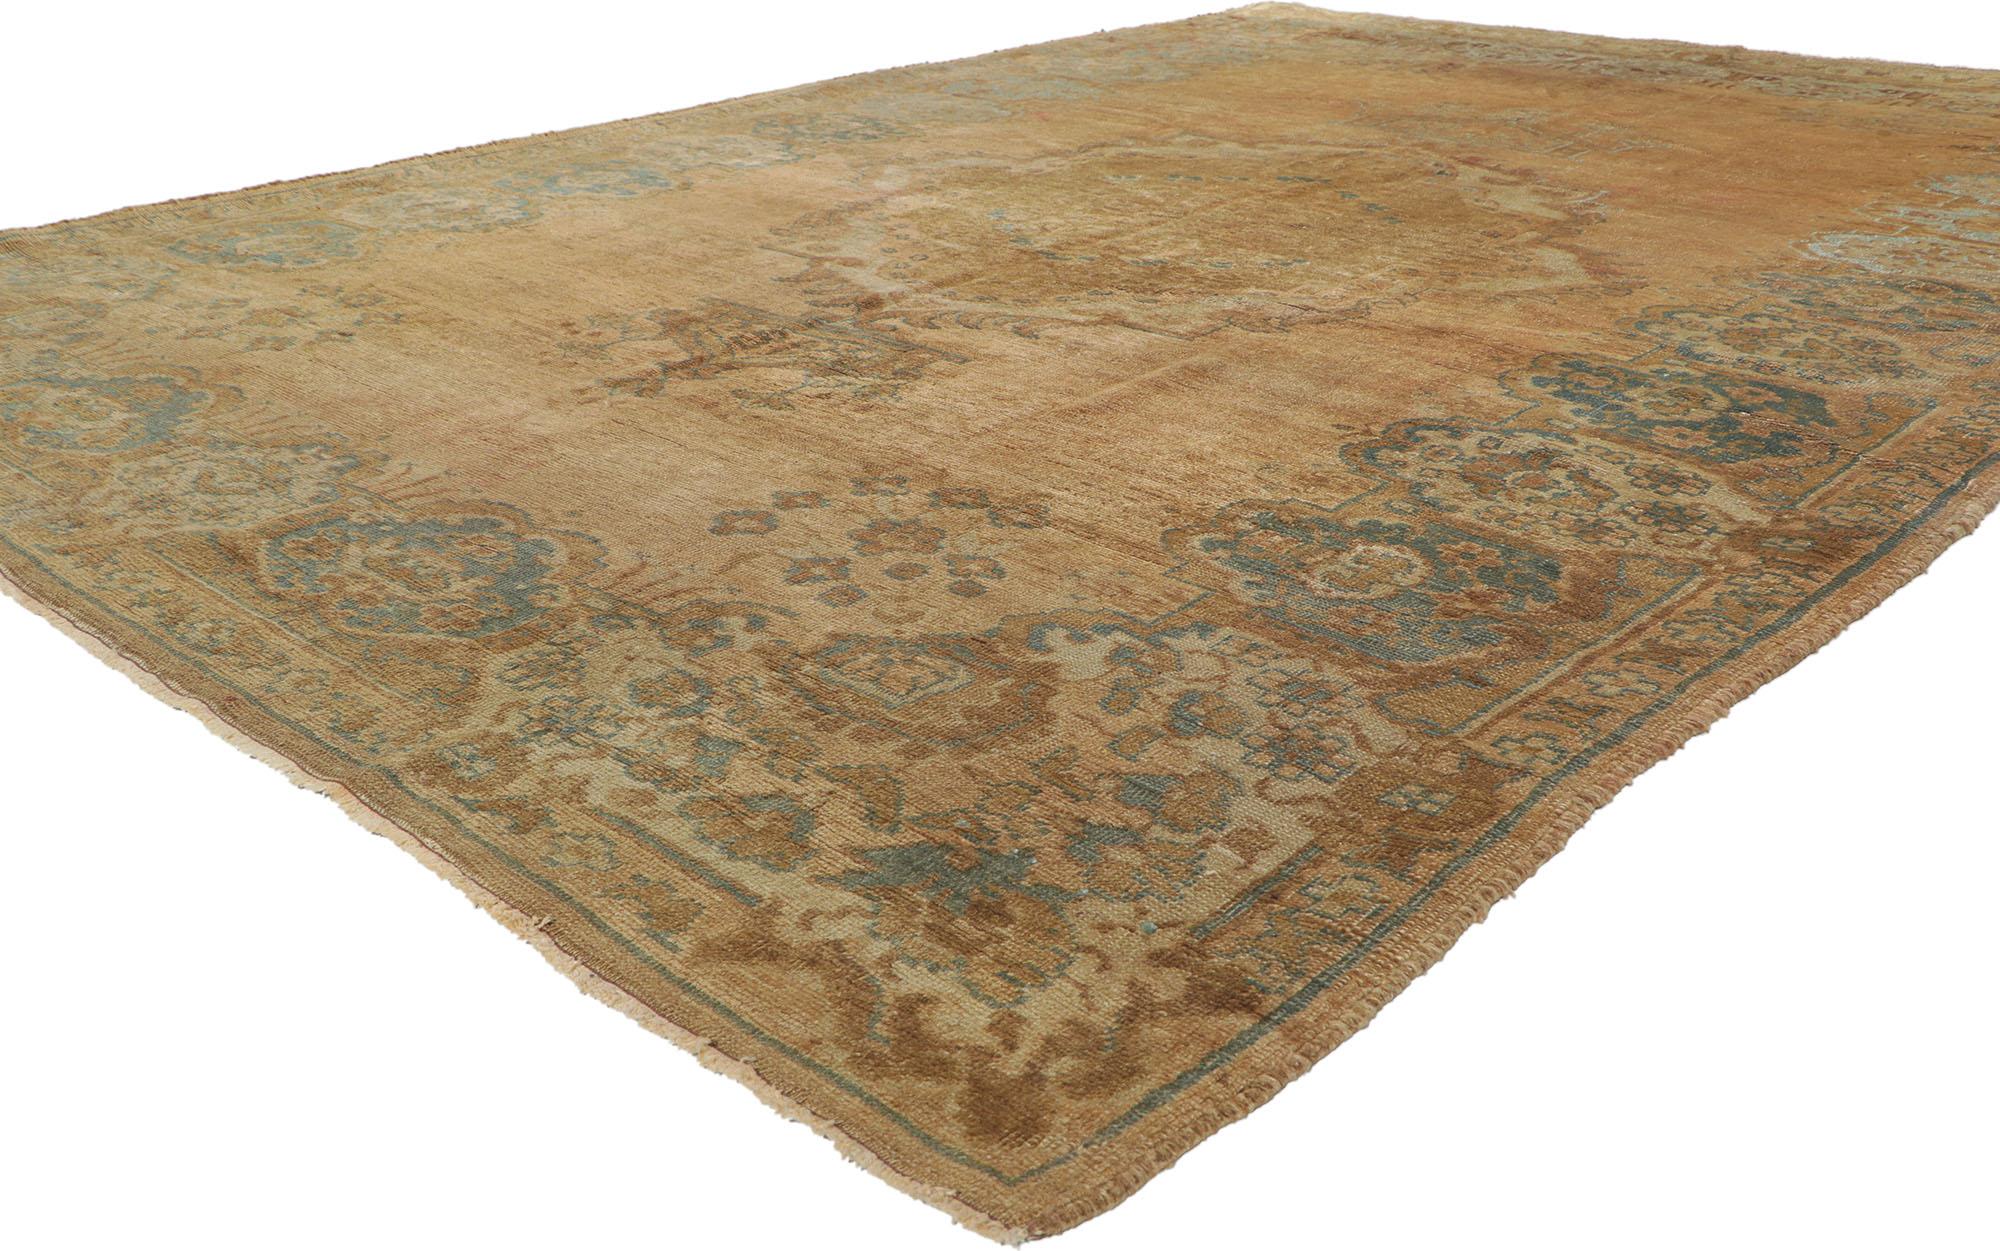 73755, vintage Turkish Oushak rug with chinoiserie style or modern traditional design. This hand-knotted wool vintage Turkish Oushak rug with features a large scale medallion with petal like lobes and two crowns extending from either end. The